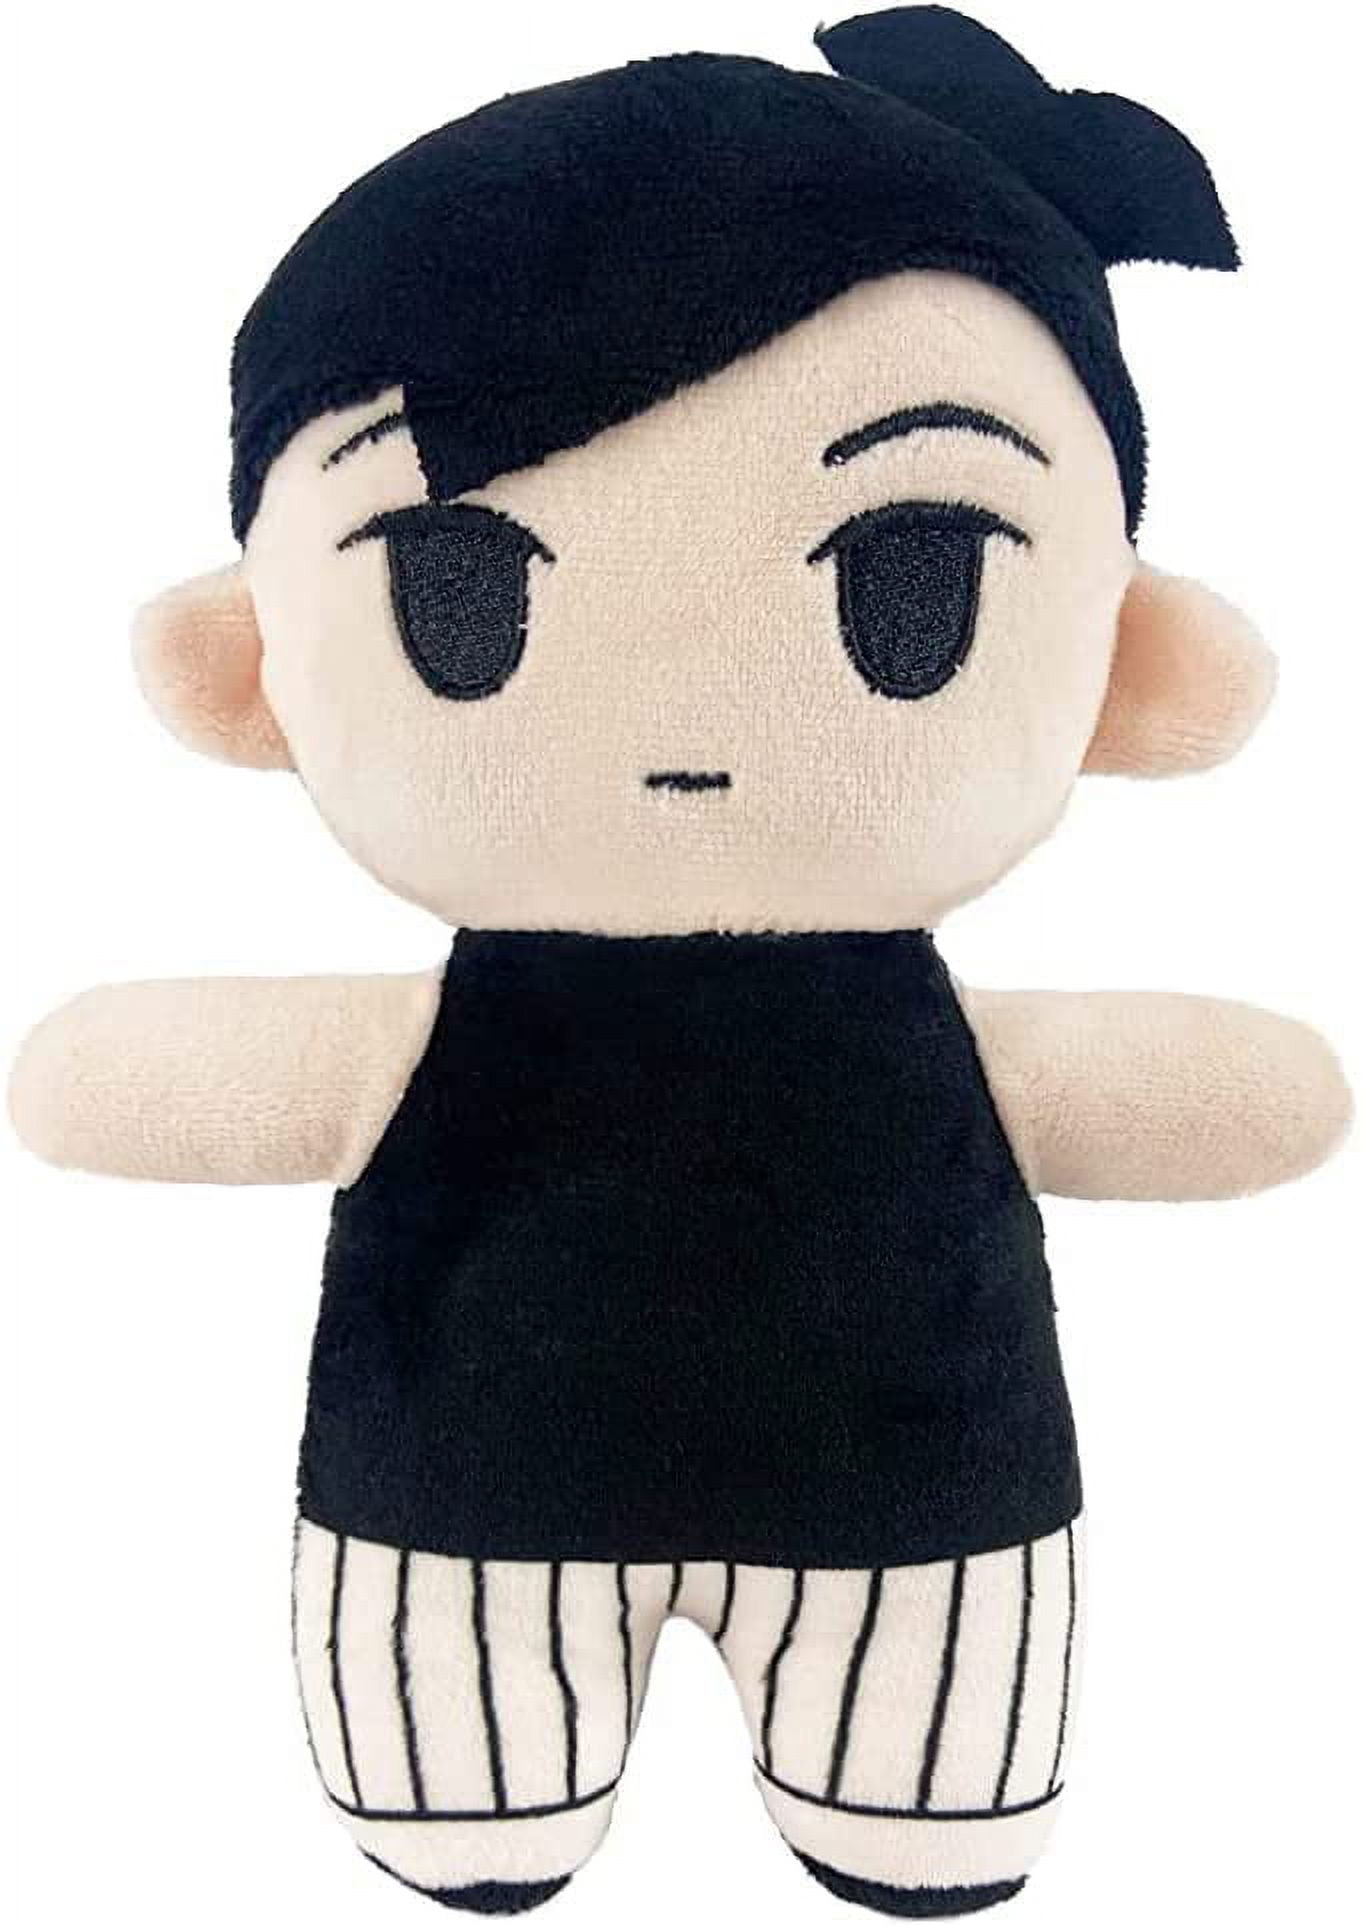 Making official Omori plushies - iFunny